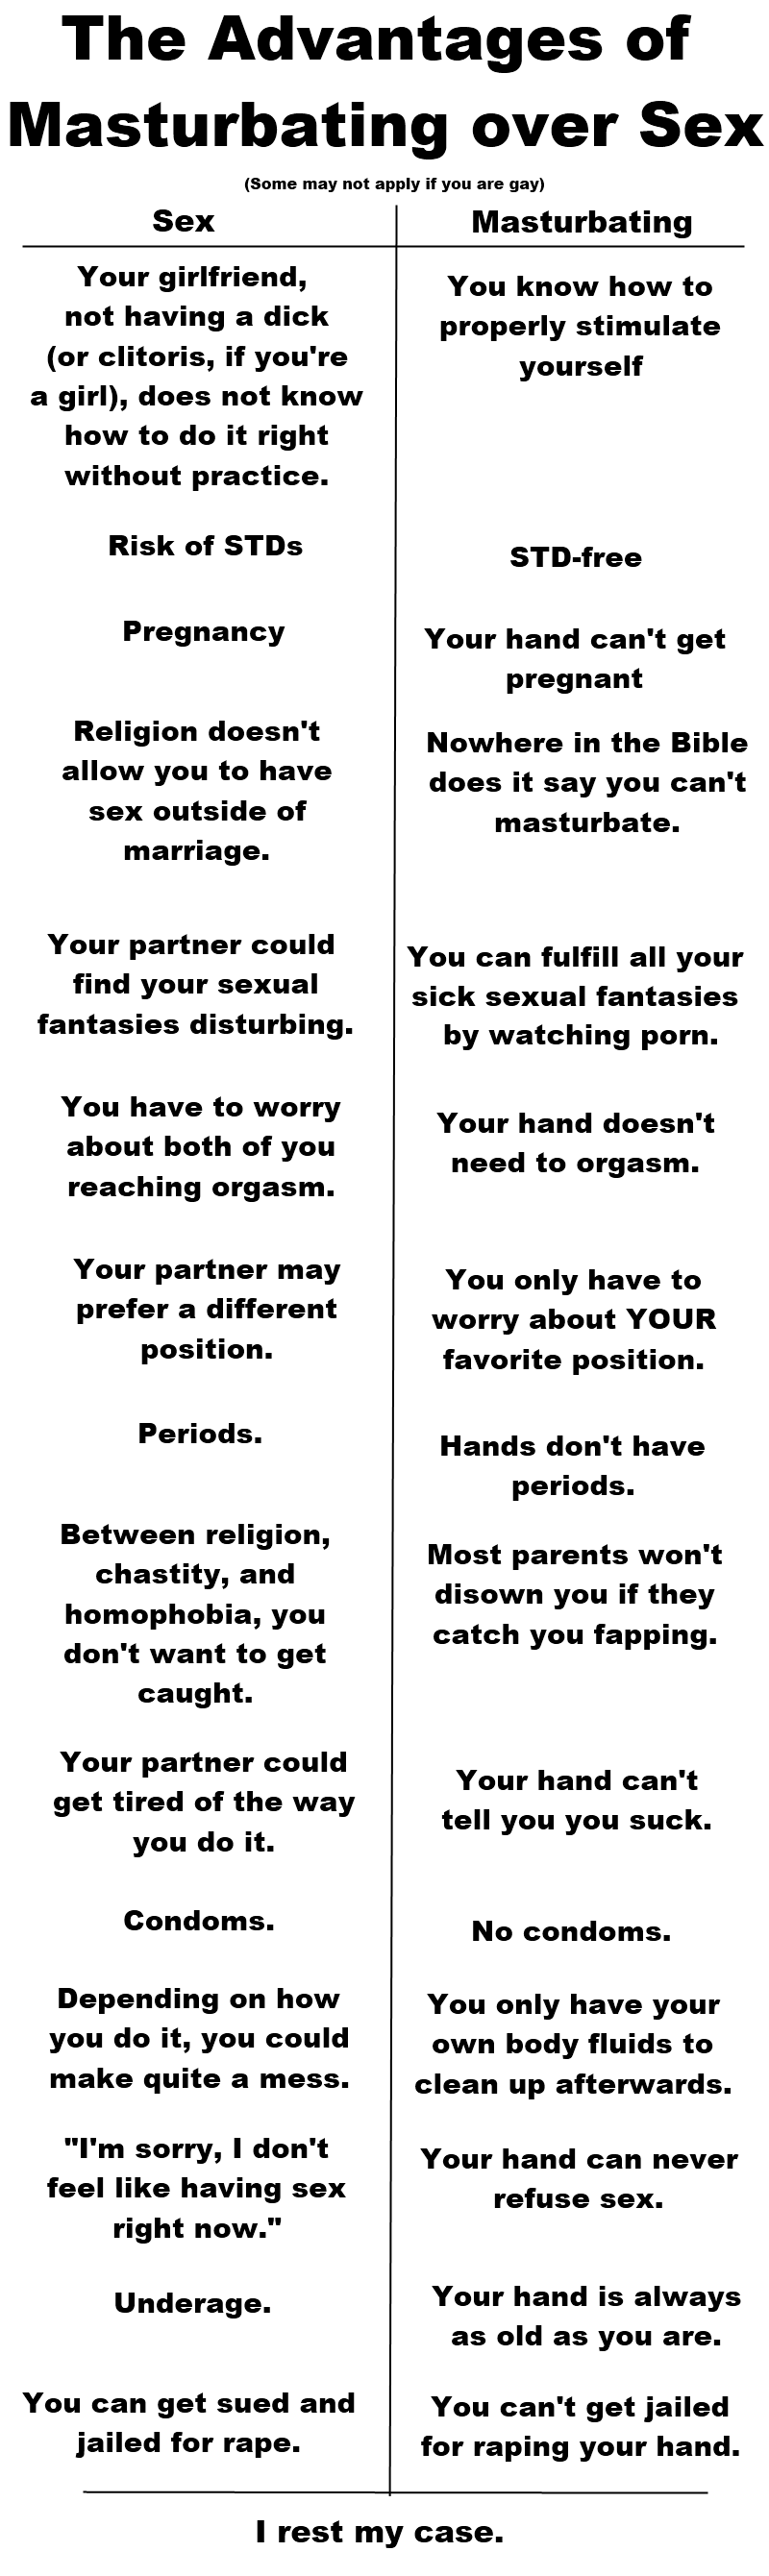 Masturbation vs. Sex. . The Advantages of Masturbating over Sex Some may not apply if you are gay) Sex Masturbating Your girlfriend, not having a dick or clitor